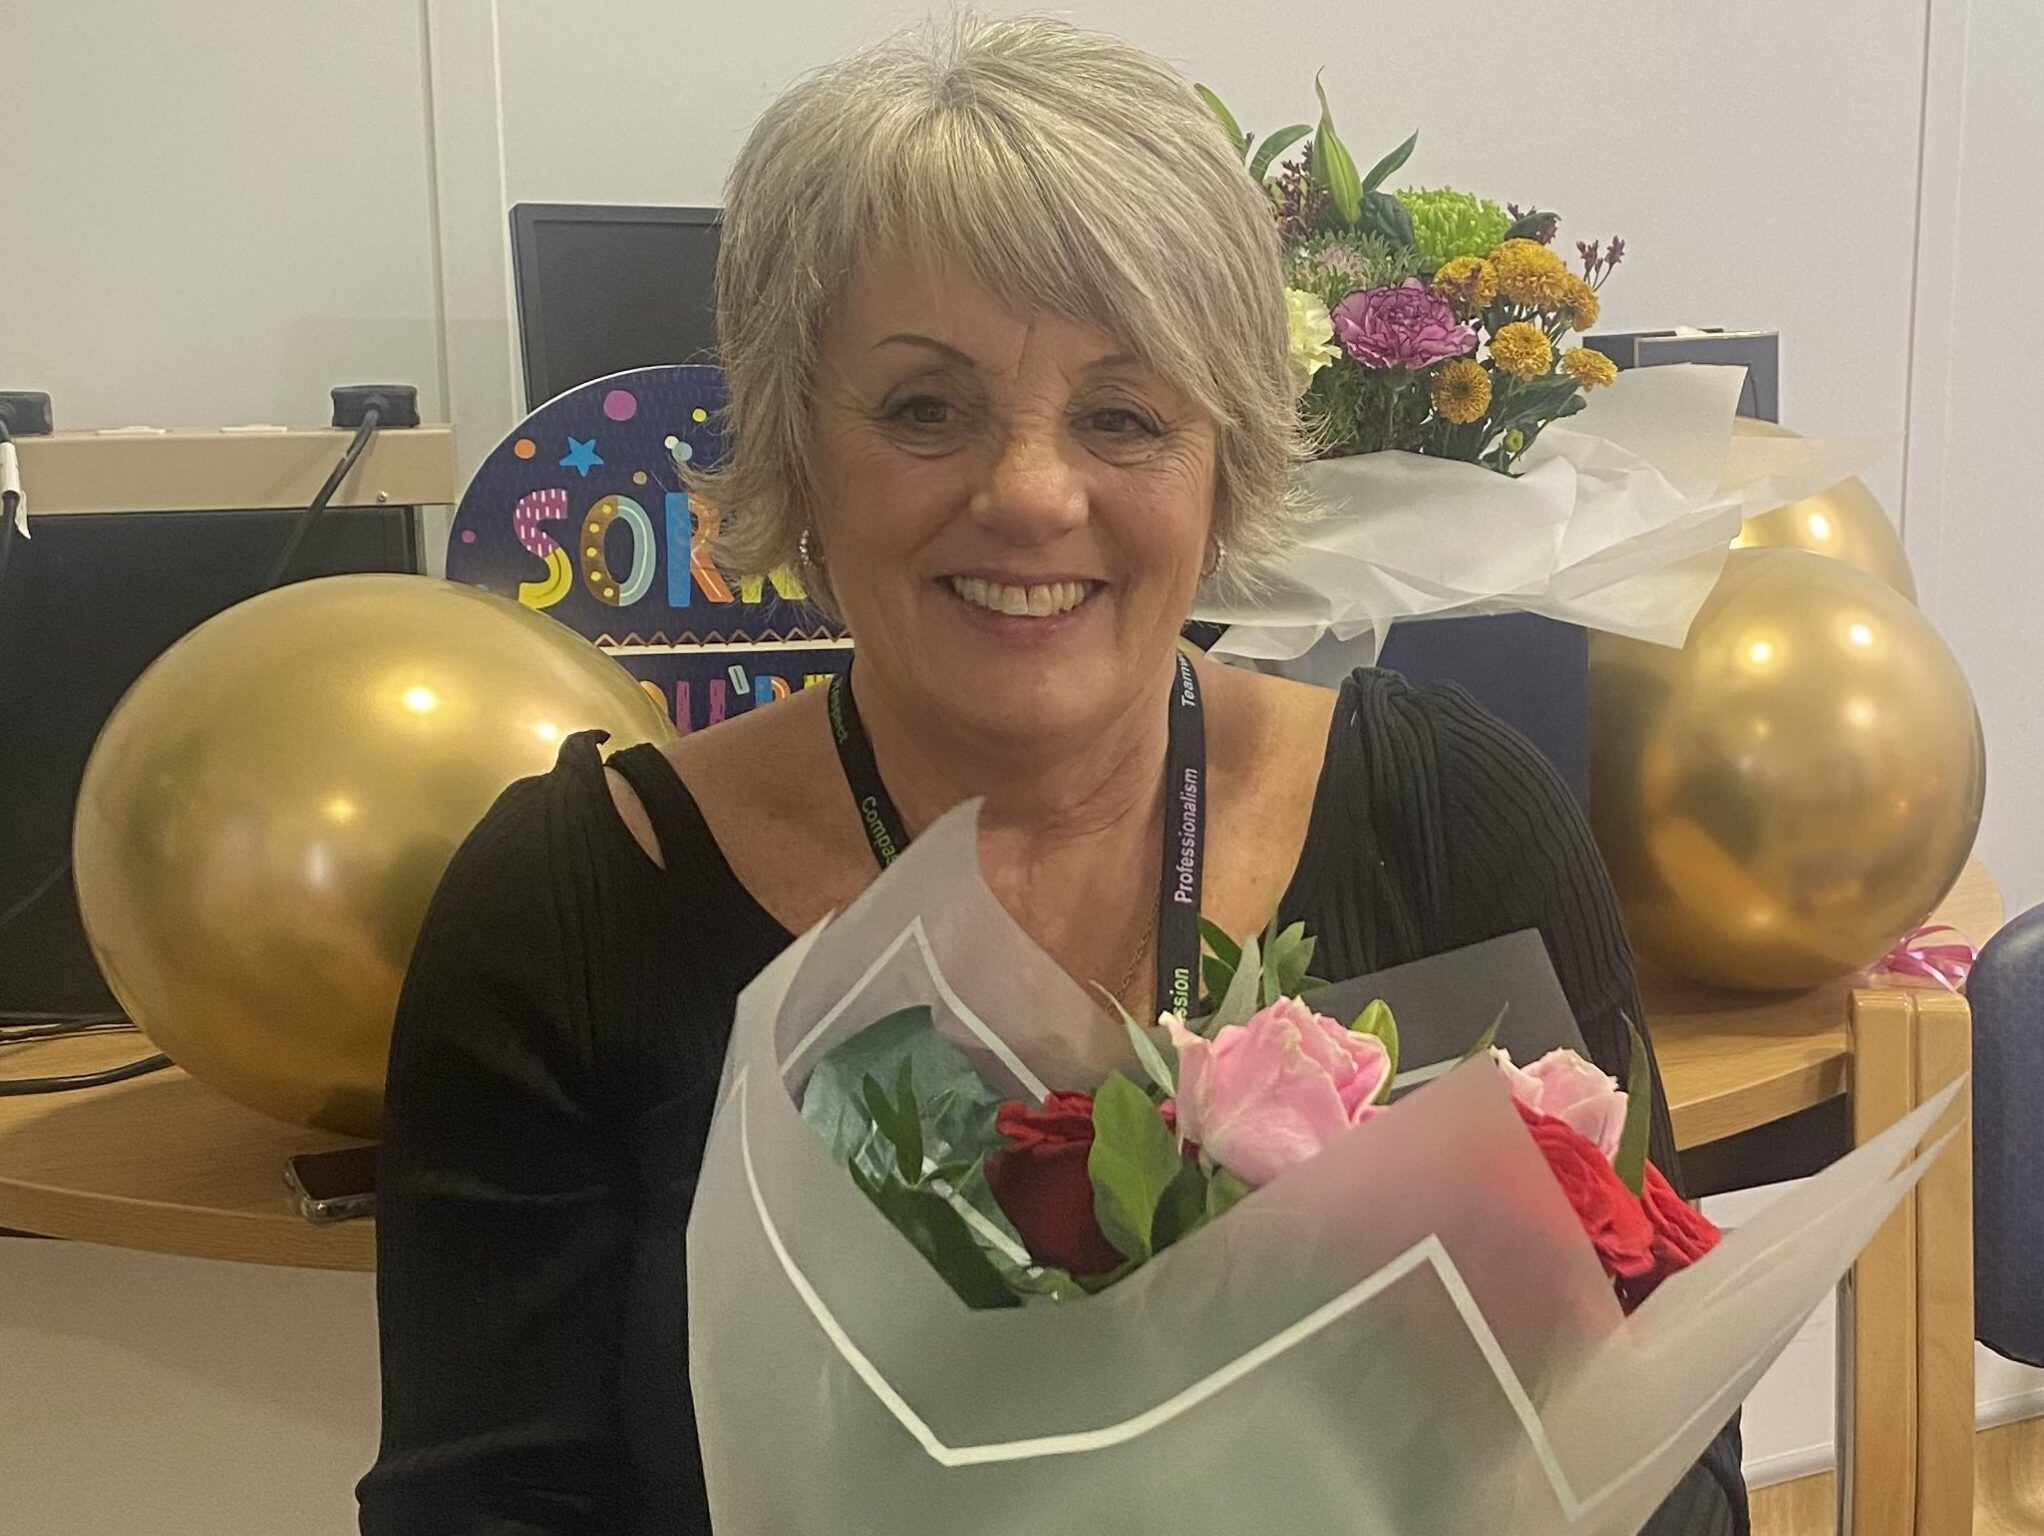 Business administrator Elaine who always had colleagues’ best interests at heart retires after 27 year career in NHS